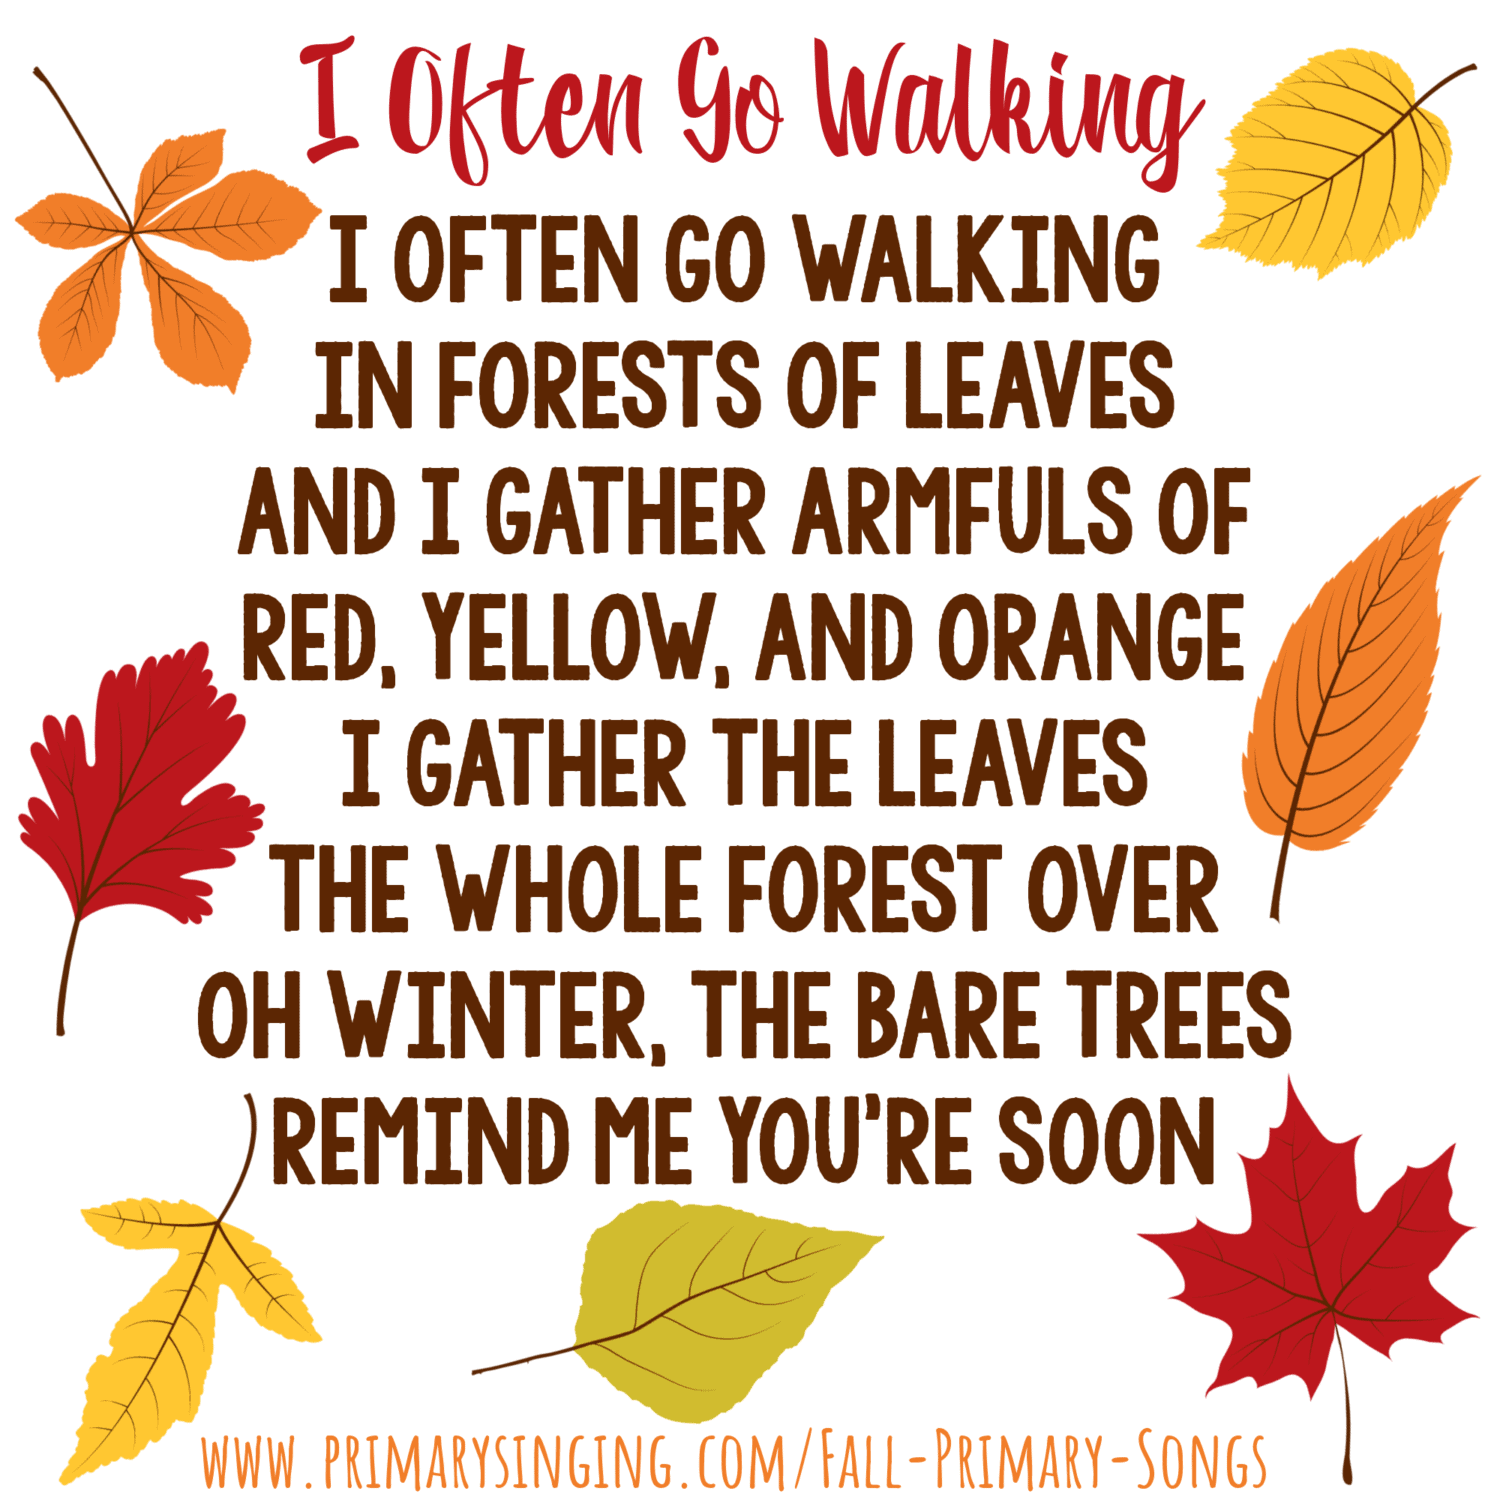 I Often Go Walking - Fall Edition! Try out these fun alternate lyrics swapped for the seasons of this classic spring LDS Primary Song! Great for fall singing time ideas for LDS Primary Music Leaders.